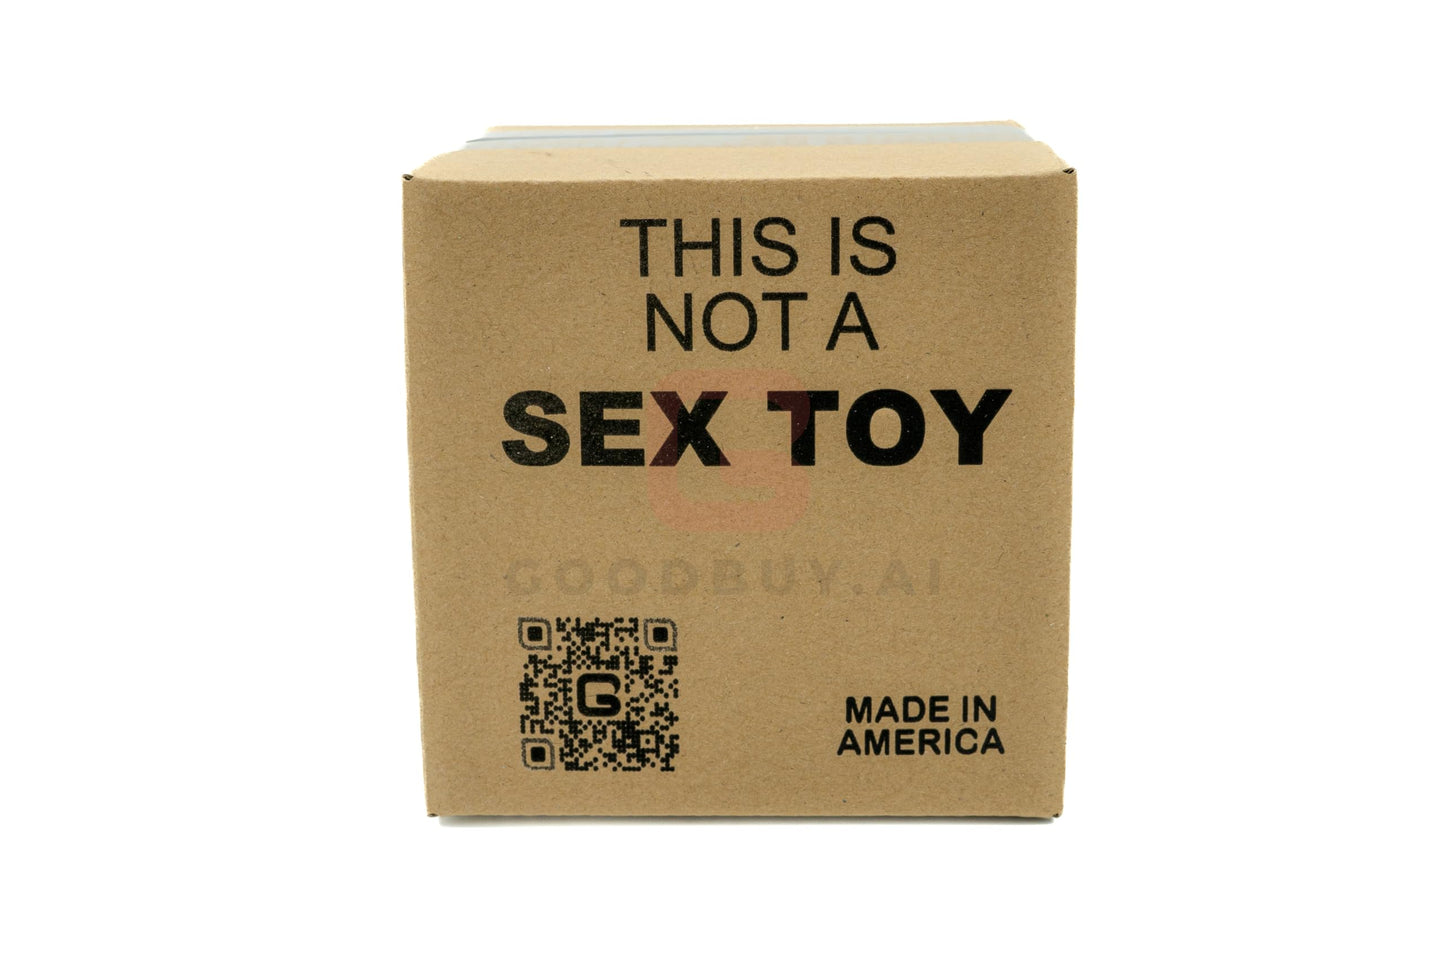 GoodBuy.ai's Mr. Nice Guy - Ultimate Prank Gift in "Not a Sex Toy" Box - 3D Printed Viral Sensation - GoodBuy.ai